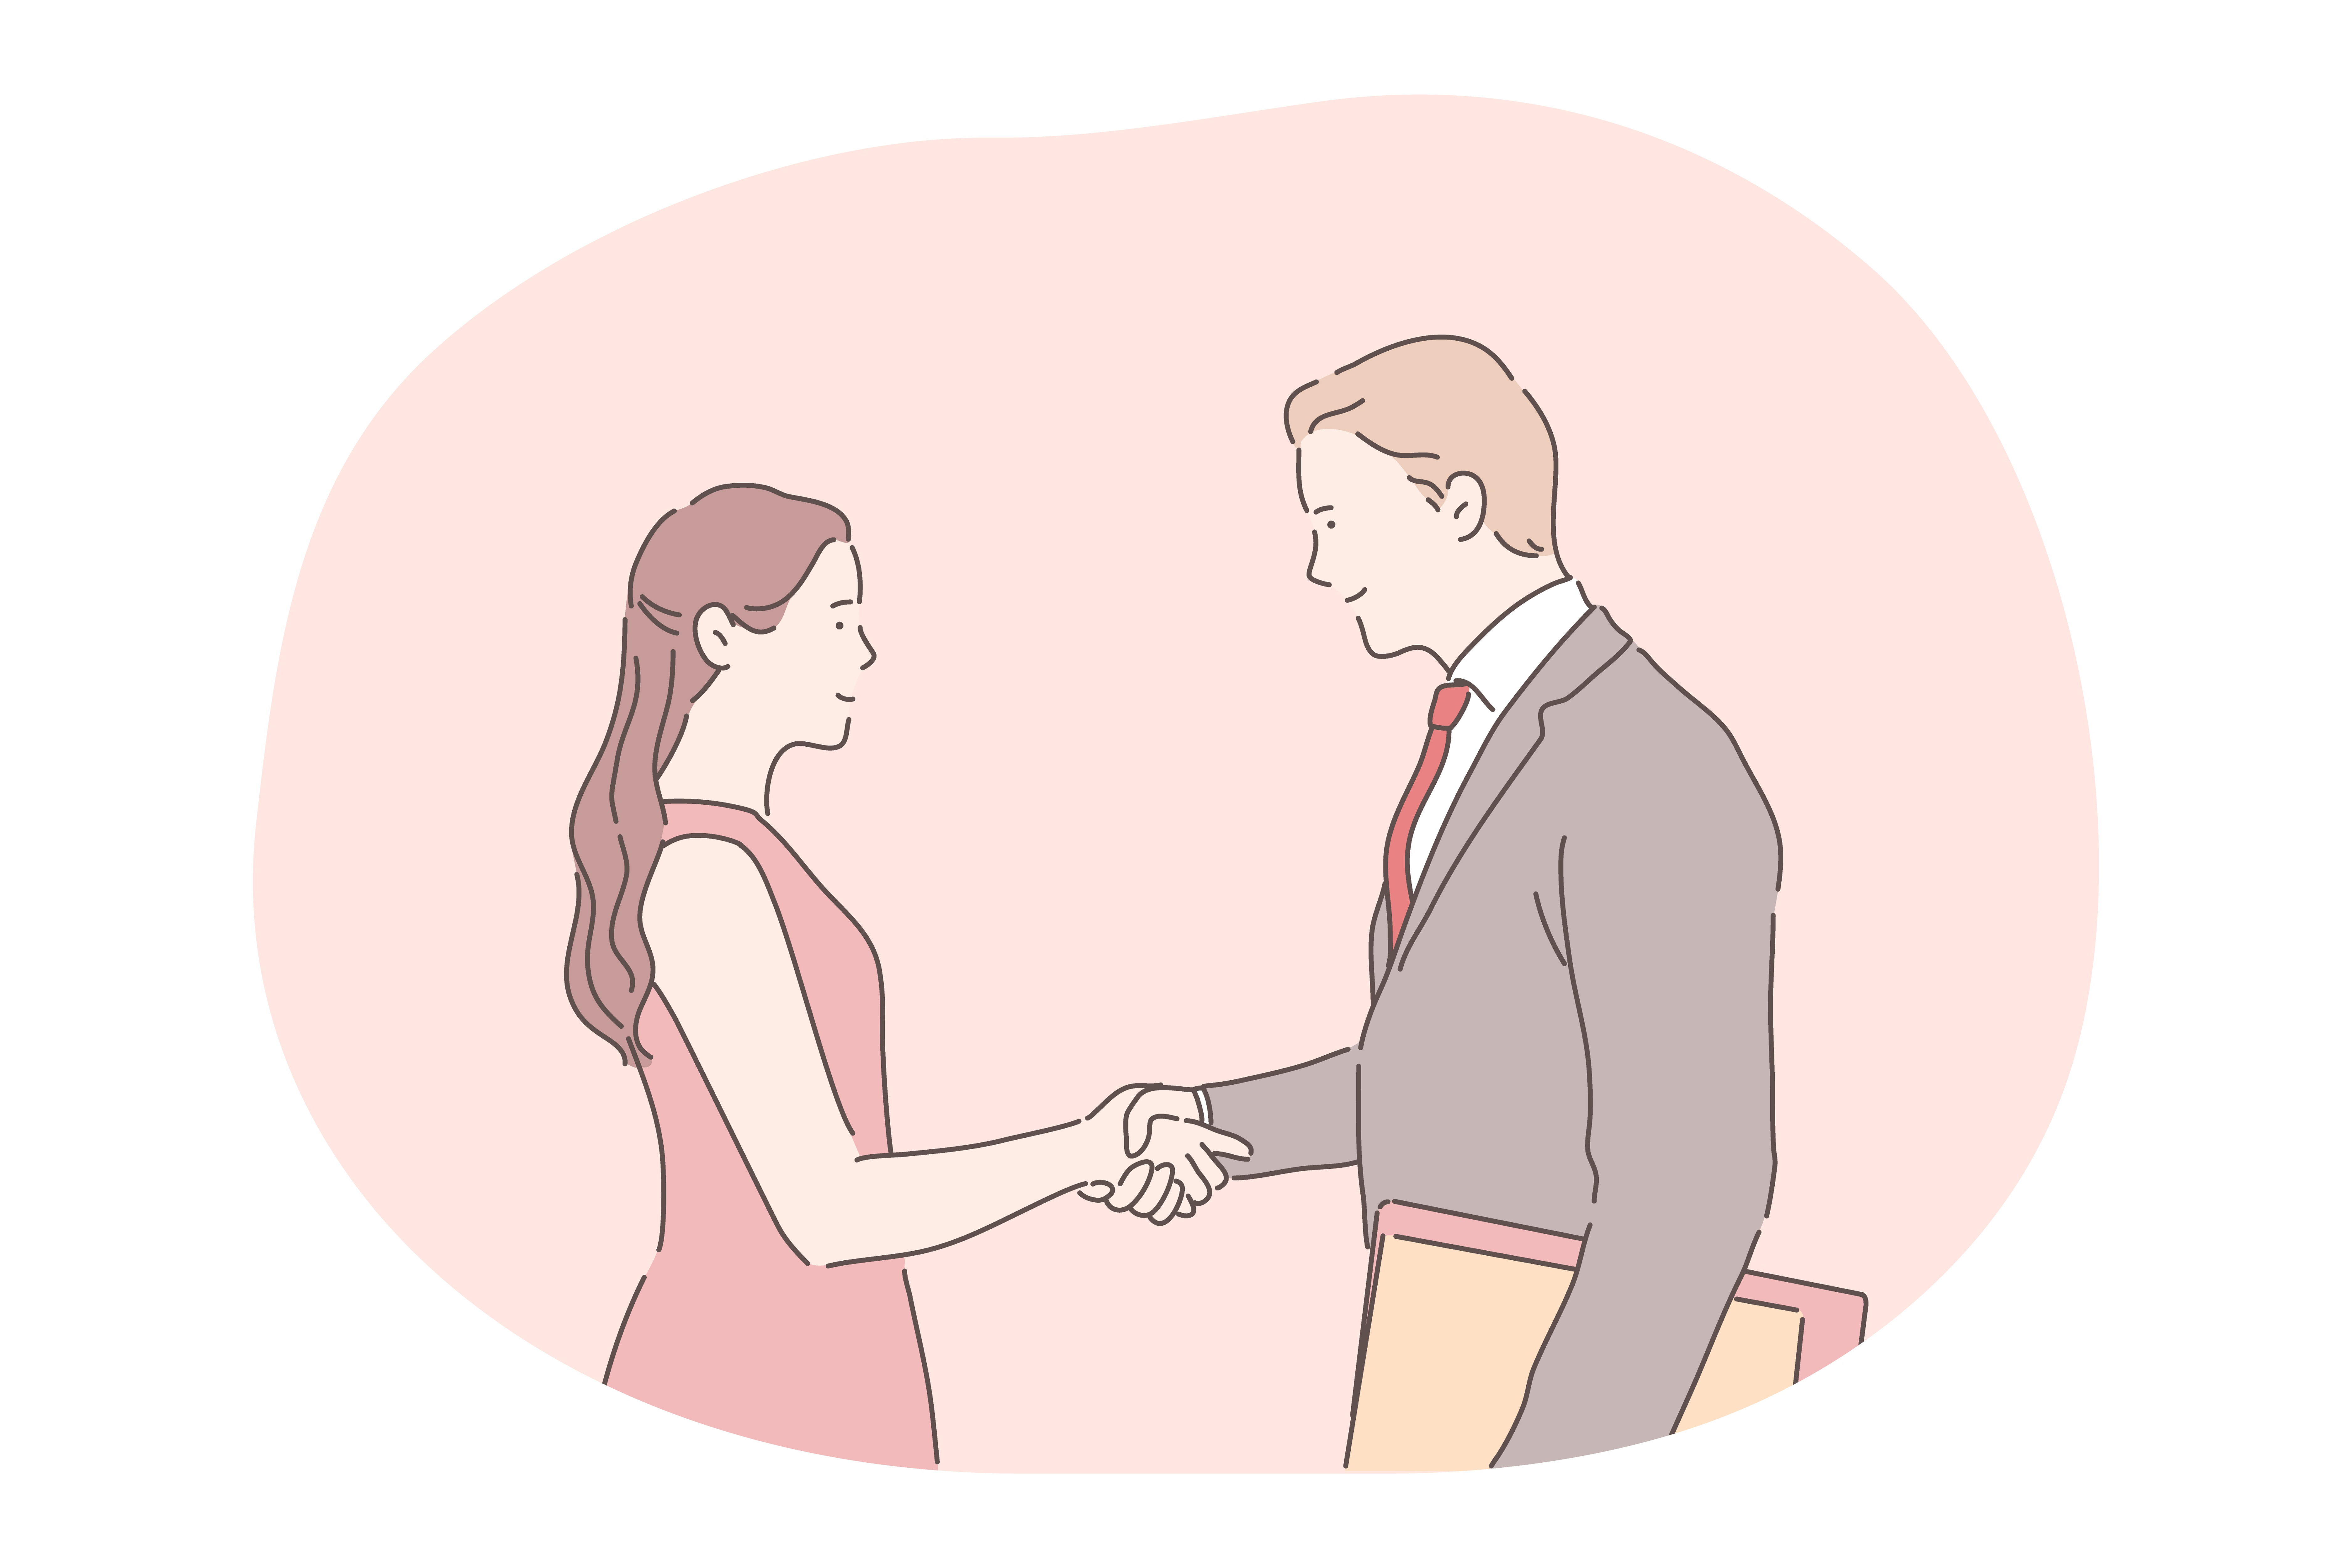 Deal, business agreement, successful negotiations concept. Young smiling business people man and woman partners cartoon characters standing and shaking hands after successful negotiations in office. Deal, business agreement, successful negotiations concept